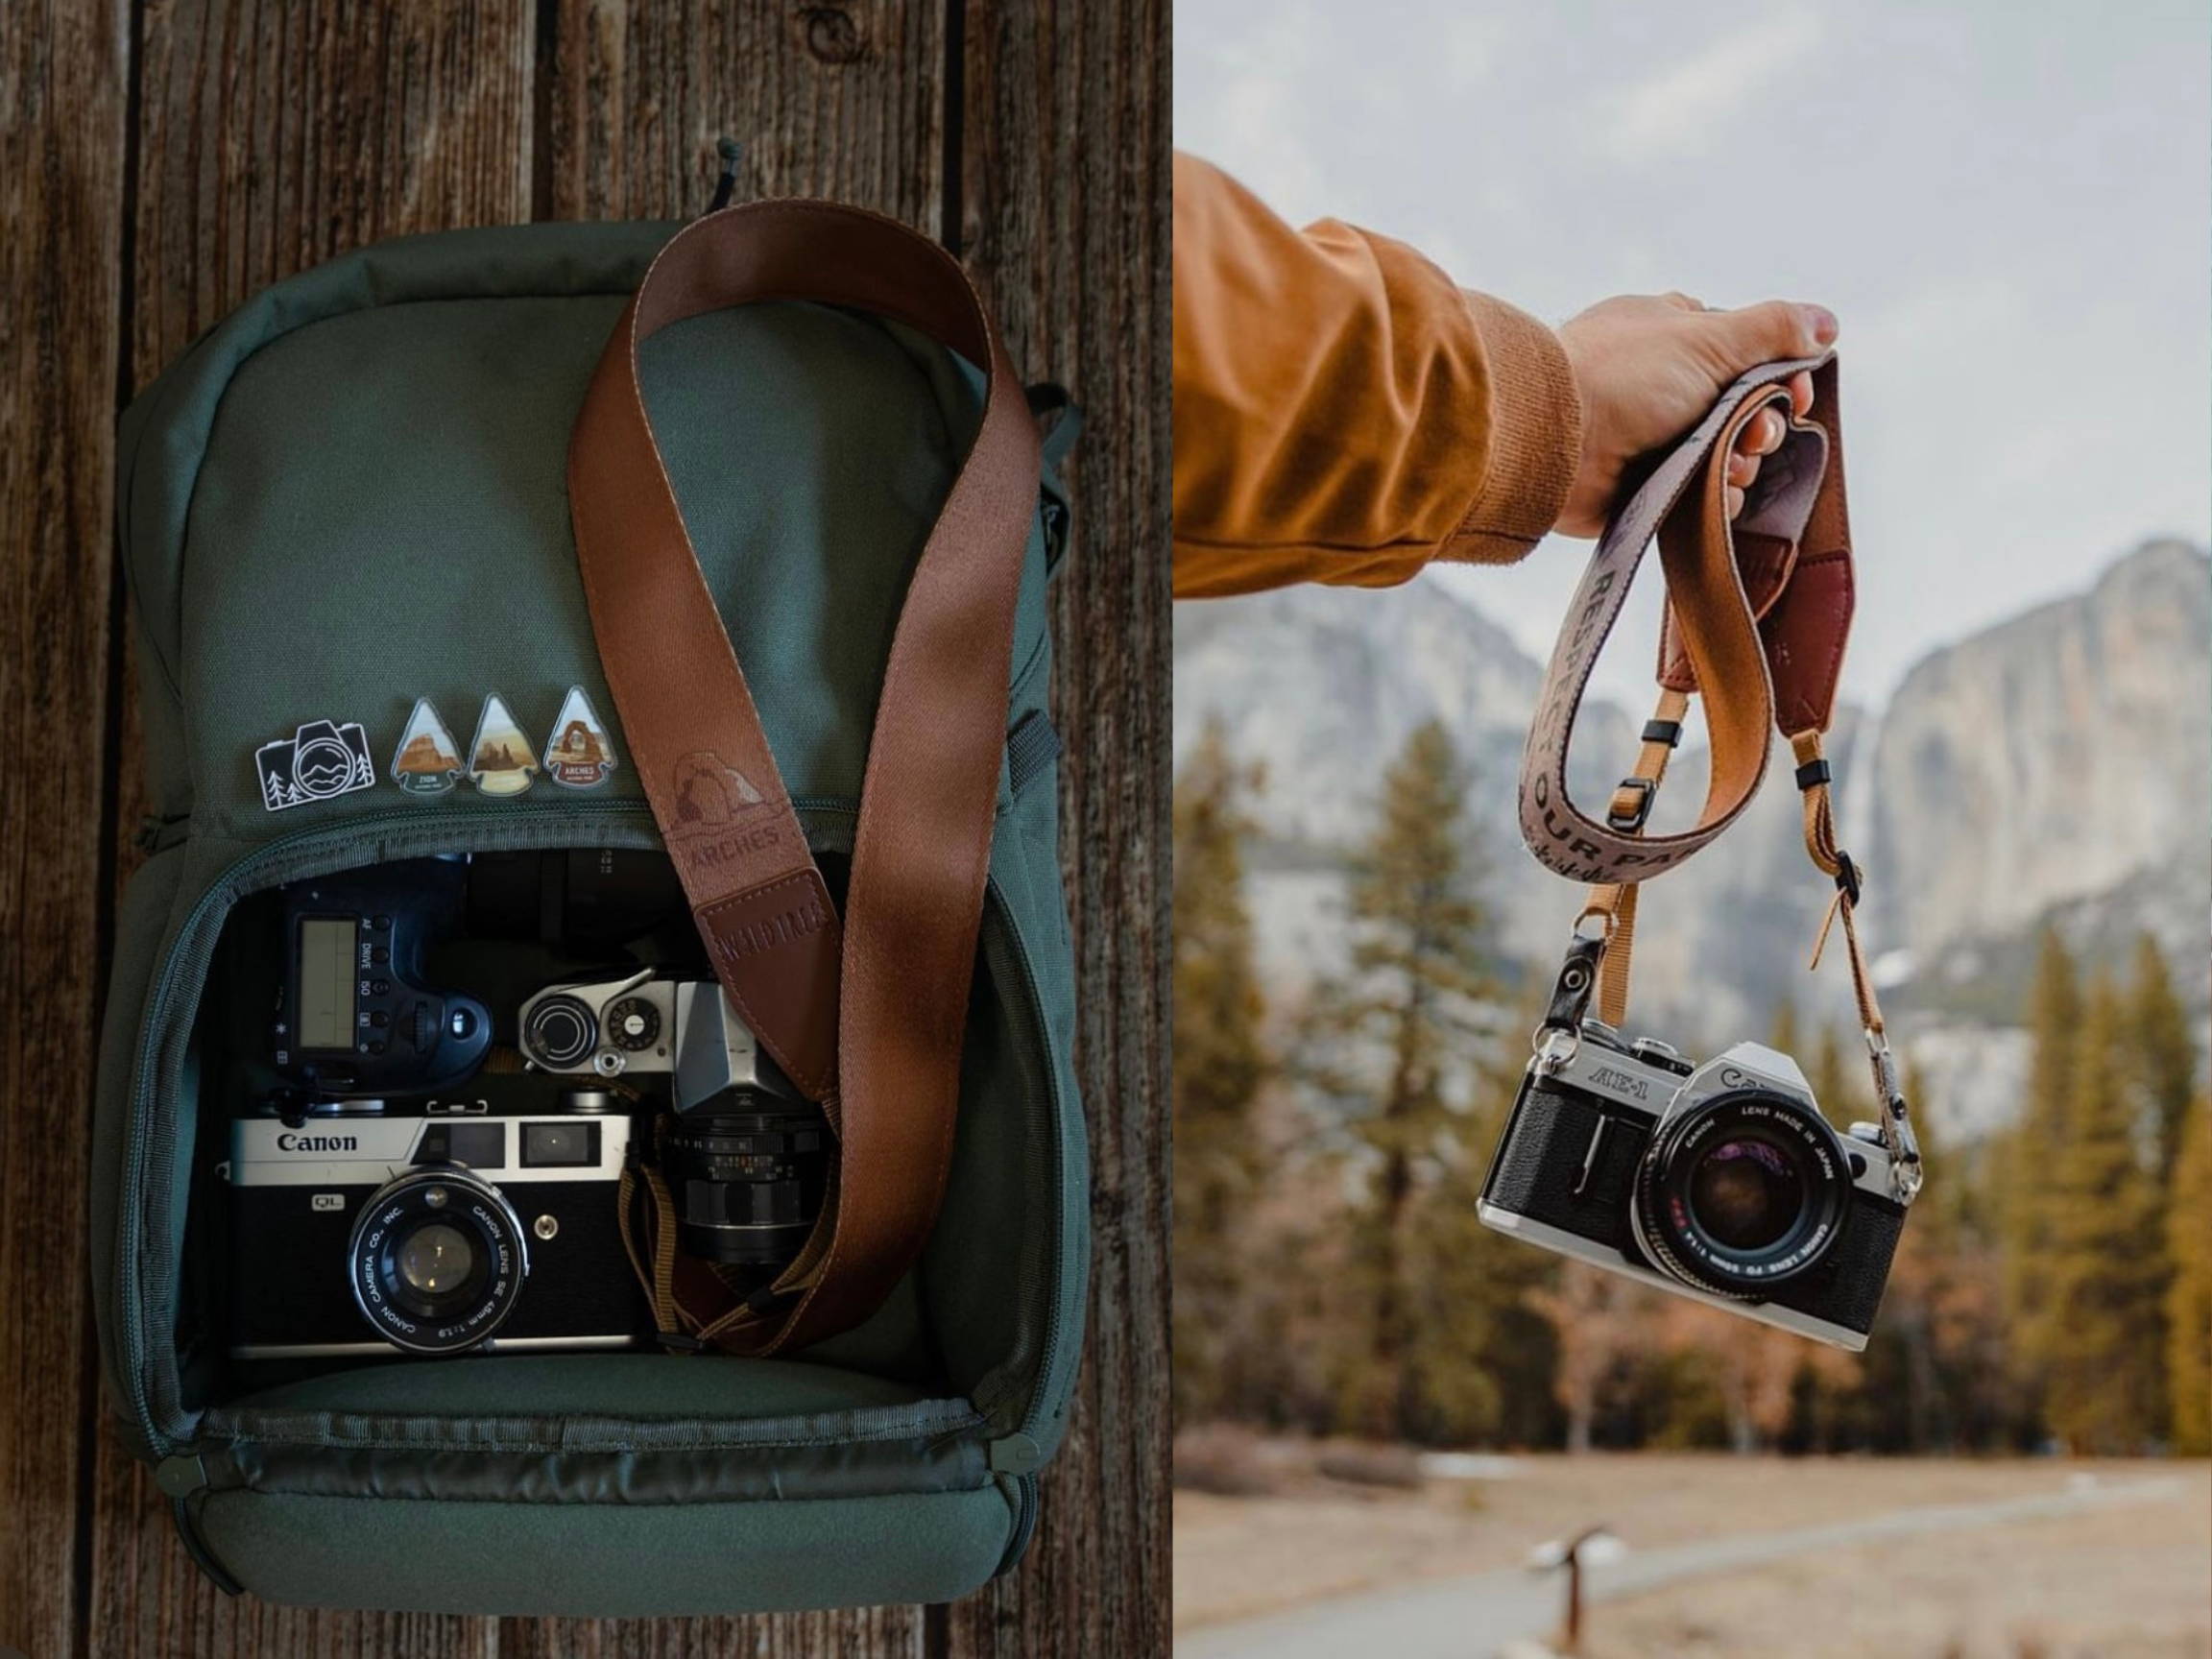 Two neck camera straps, one in a backpack and one being held outside.